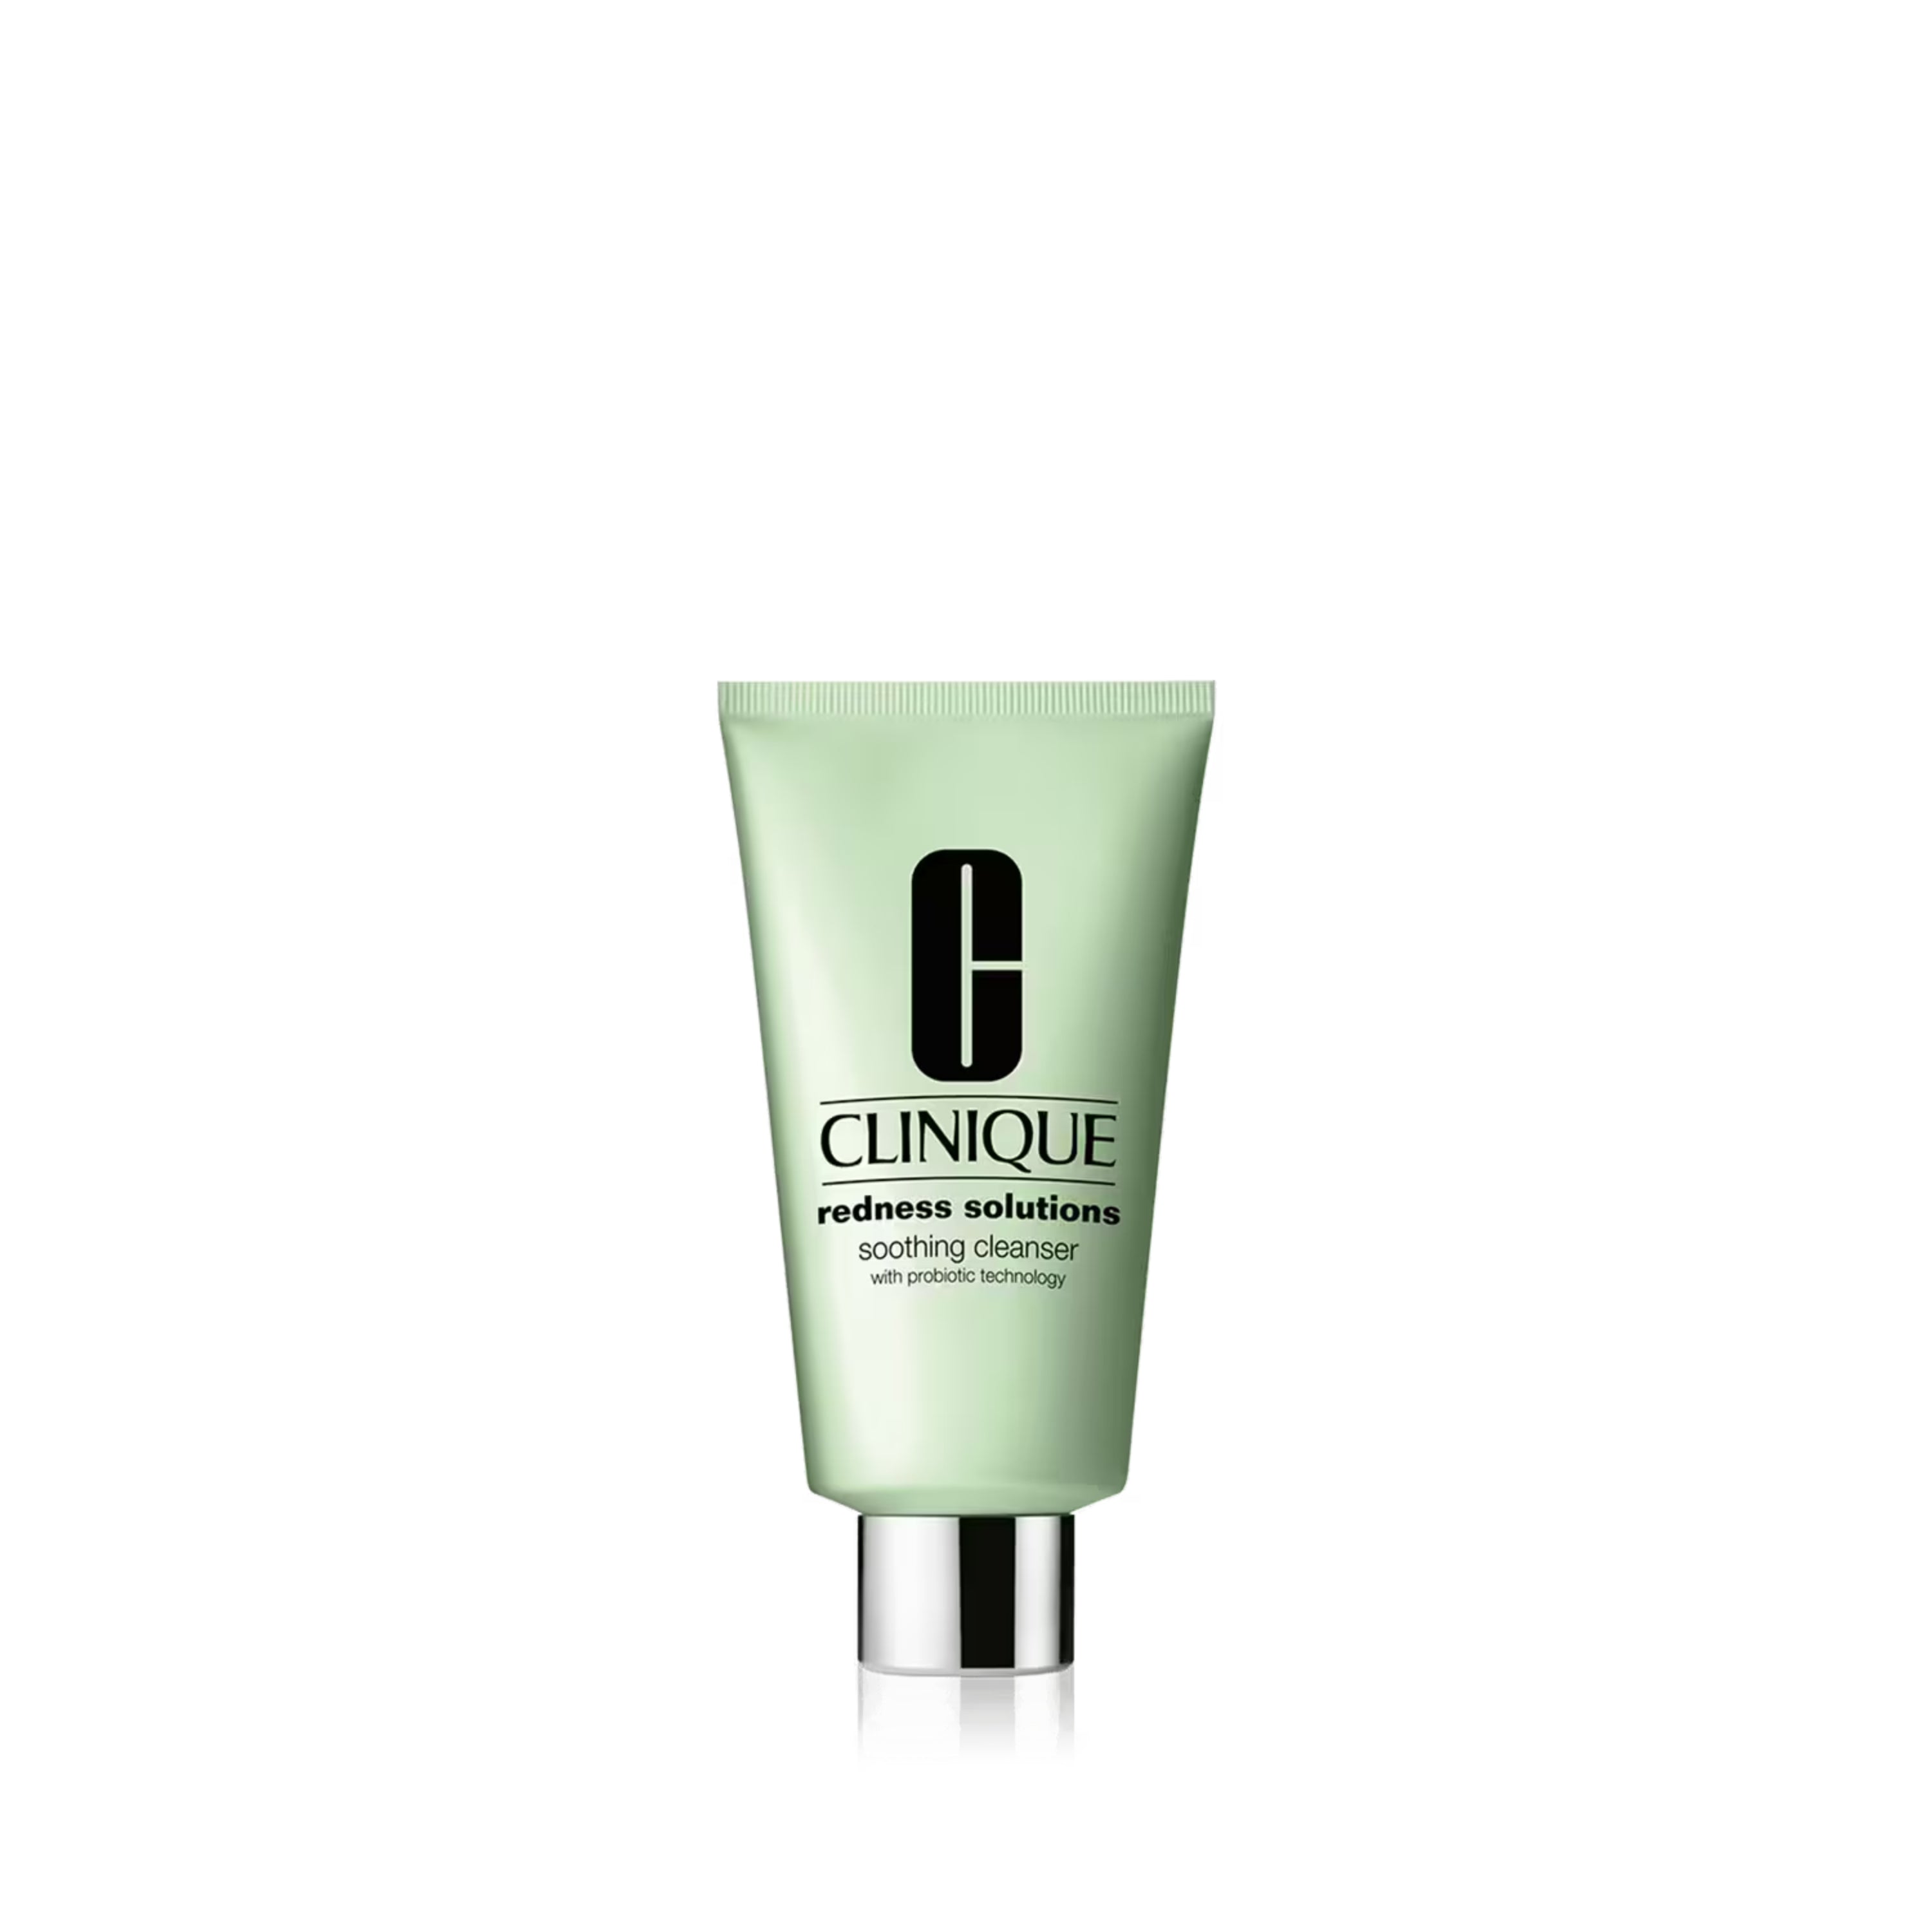 CLINIQUE Redness Solutions Soothing Cleanser